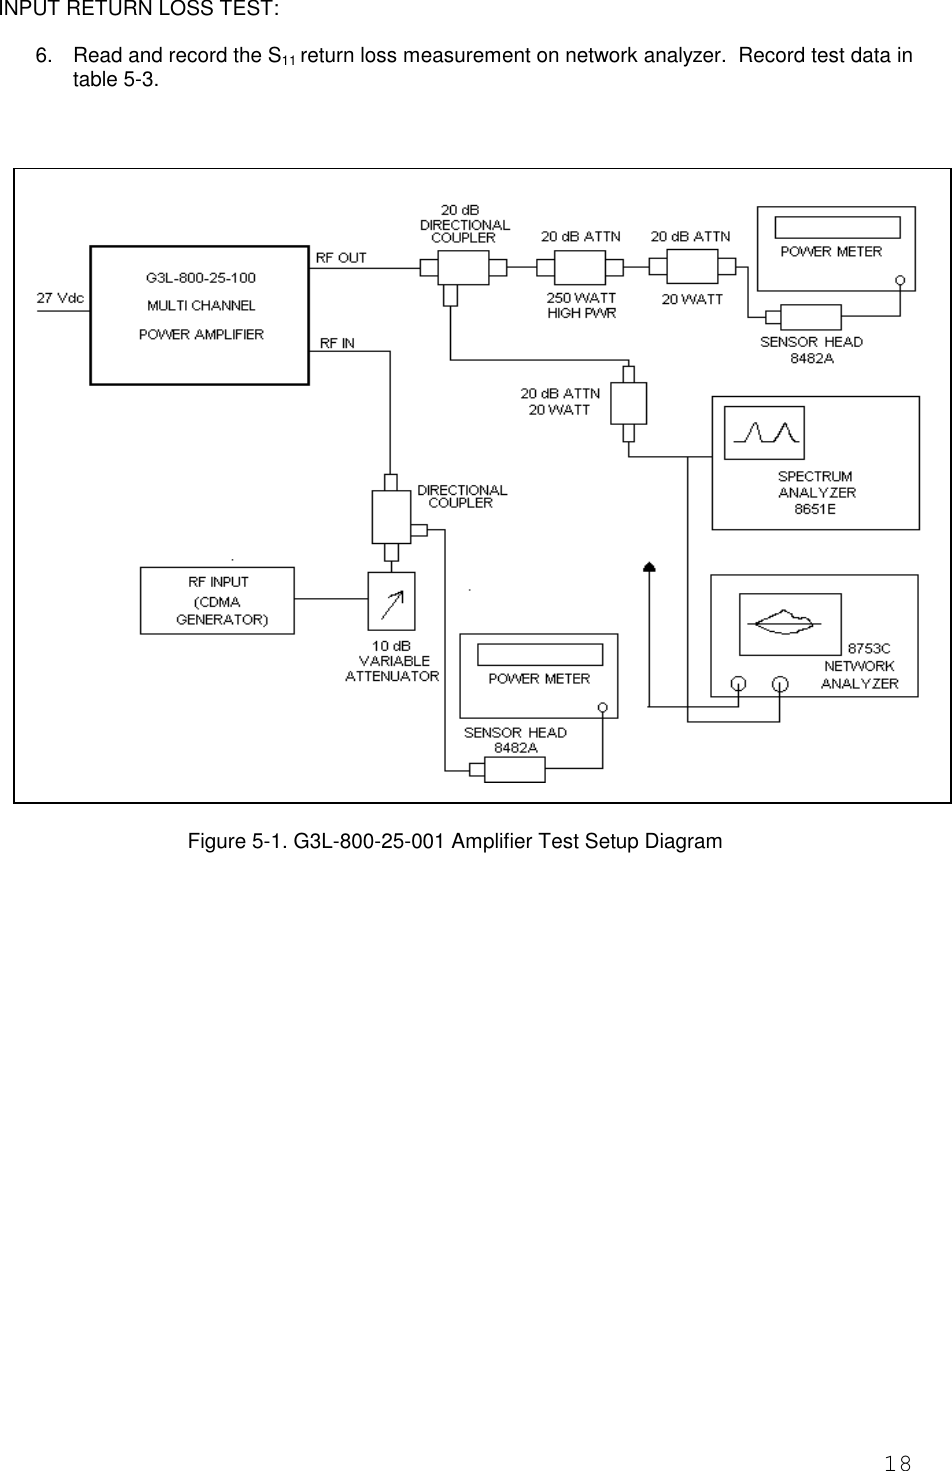 18INPUT RETURN LOSS TEST:6. Read and record the S11 return loss measurement on network analyzer.  Record test data intable 5-3.Figure 5-1. G3L-800-25-001 Amplifier Test Setup Diagram